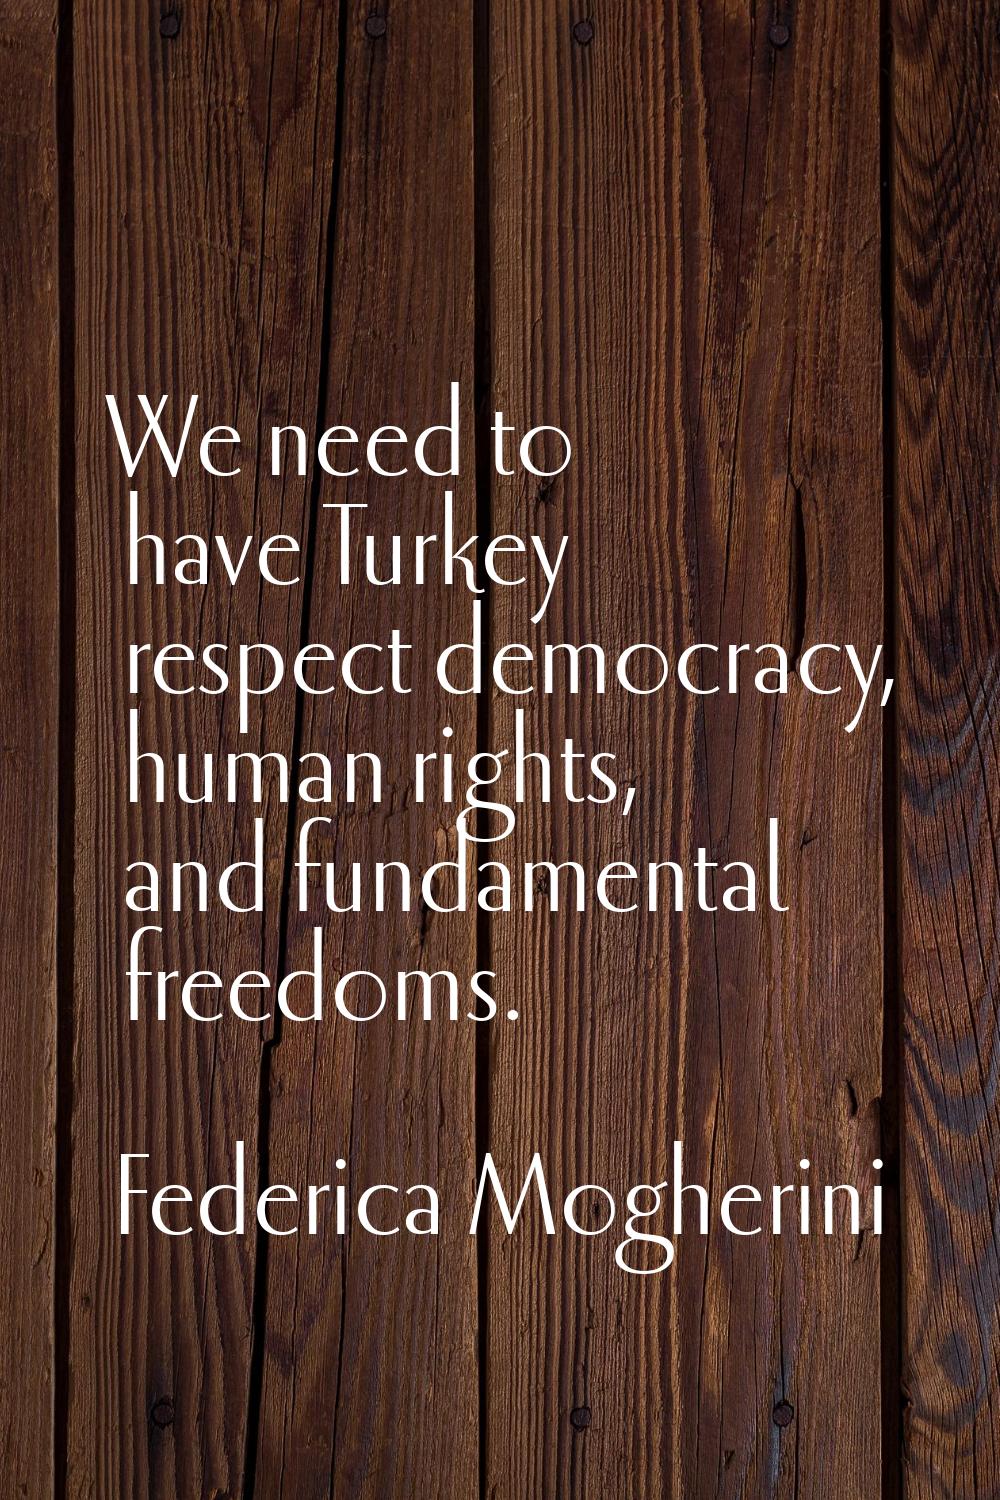 We need to have Turkey respect democracy, human rights, and fundamental freedoms.